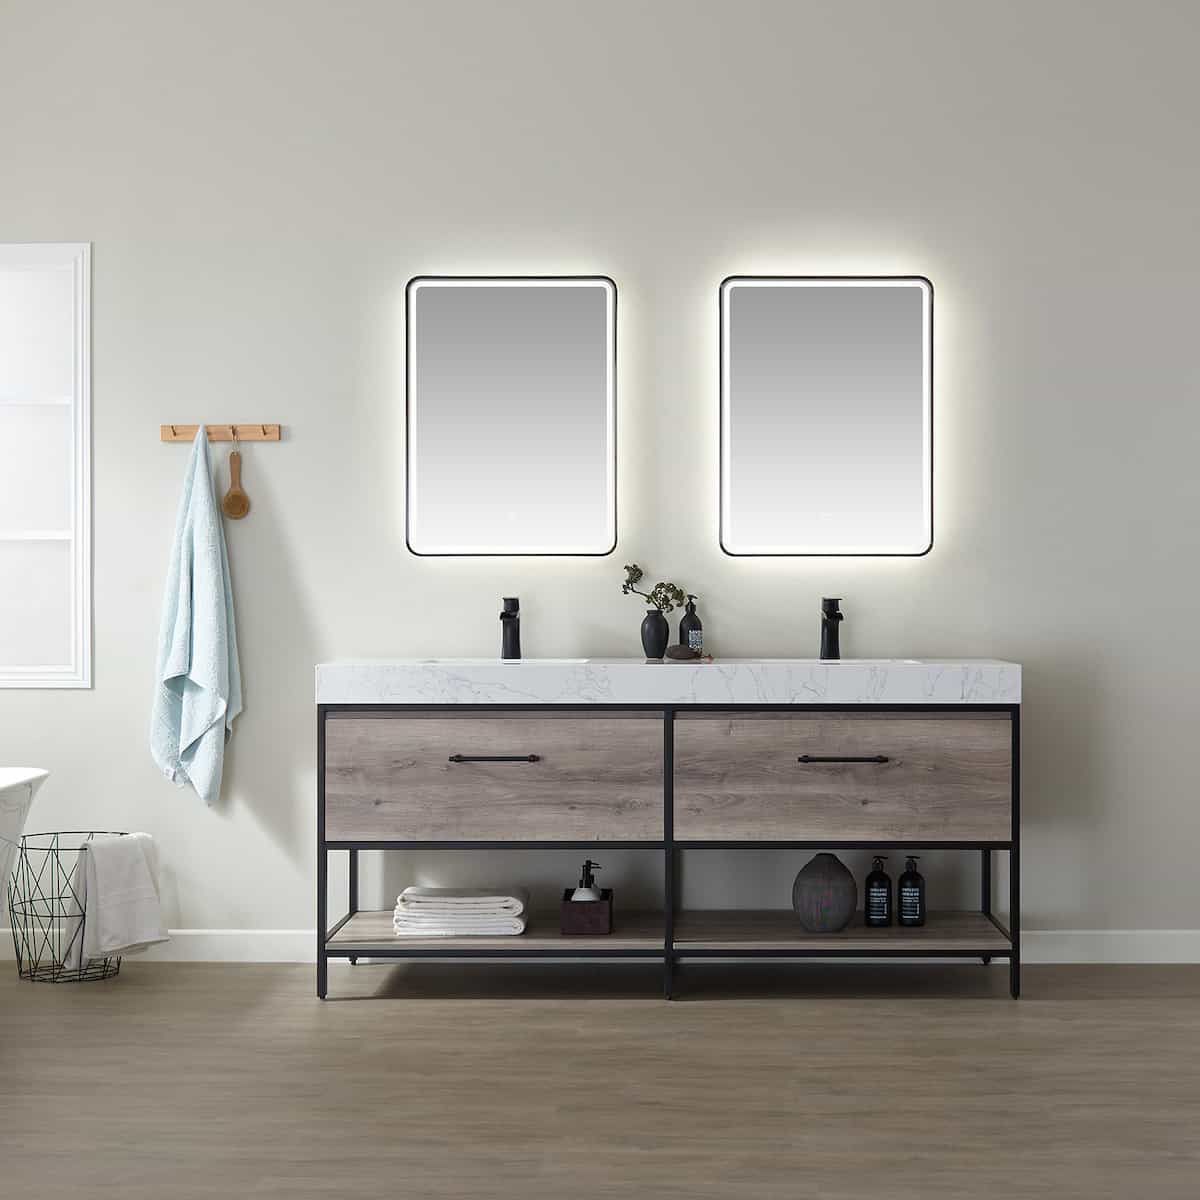 Vinnova Palma 72 Inch Freestanding Double Vanity in Mexican Oak with White Composite Grain Stone Countertop With Mirrors in Bathroom 701272-MXO-GW